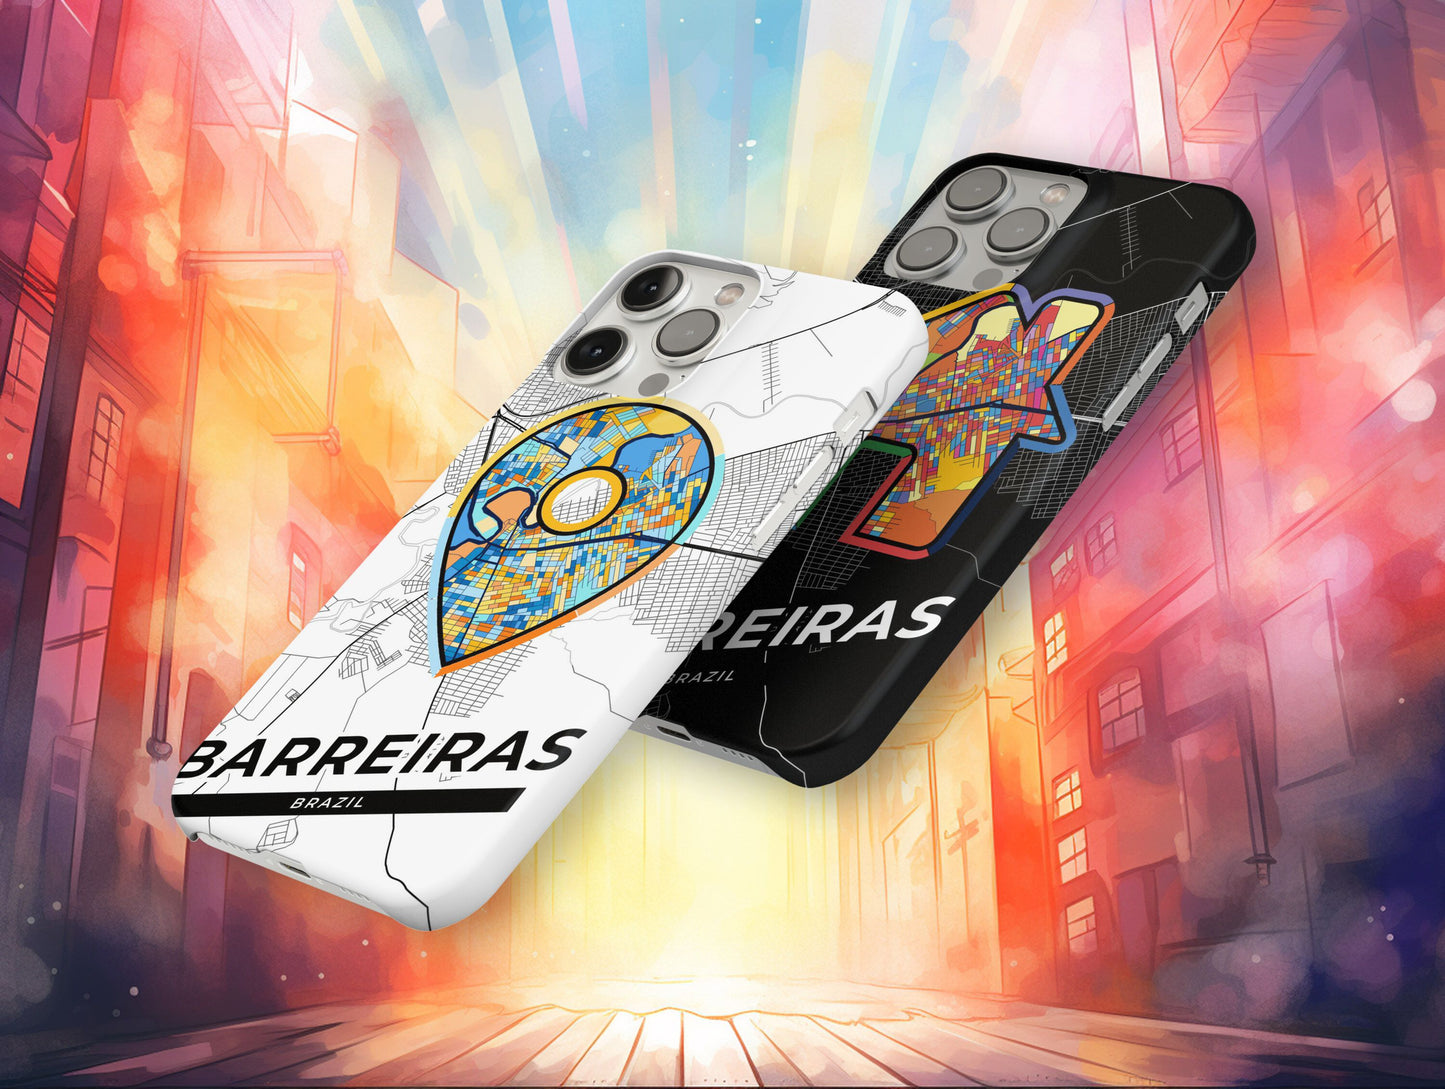 Barreiras Brazil slim phone case with colorful icon. Birthday, wedding or housewarming gift. Couple match cases.